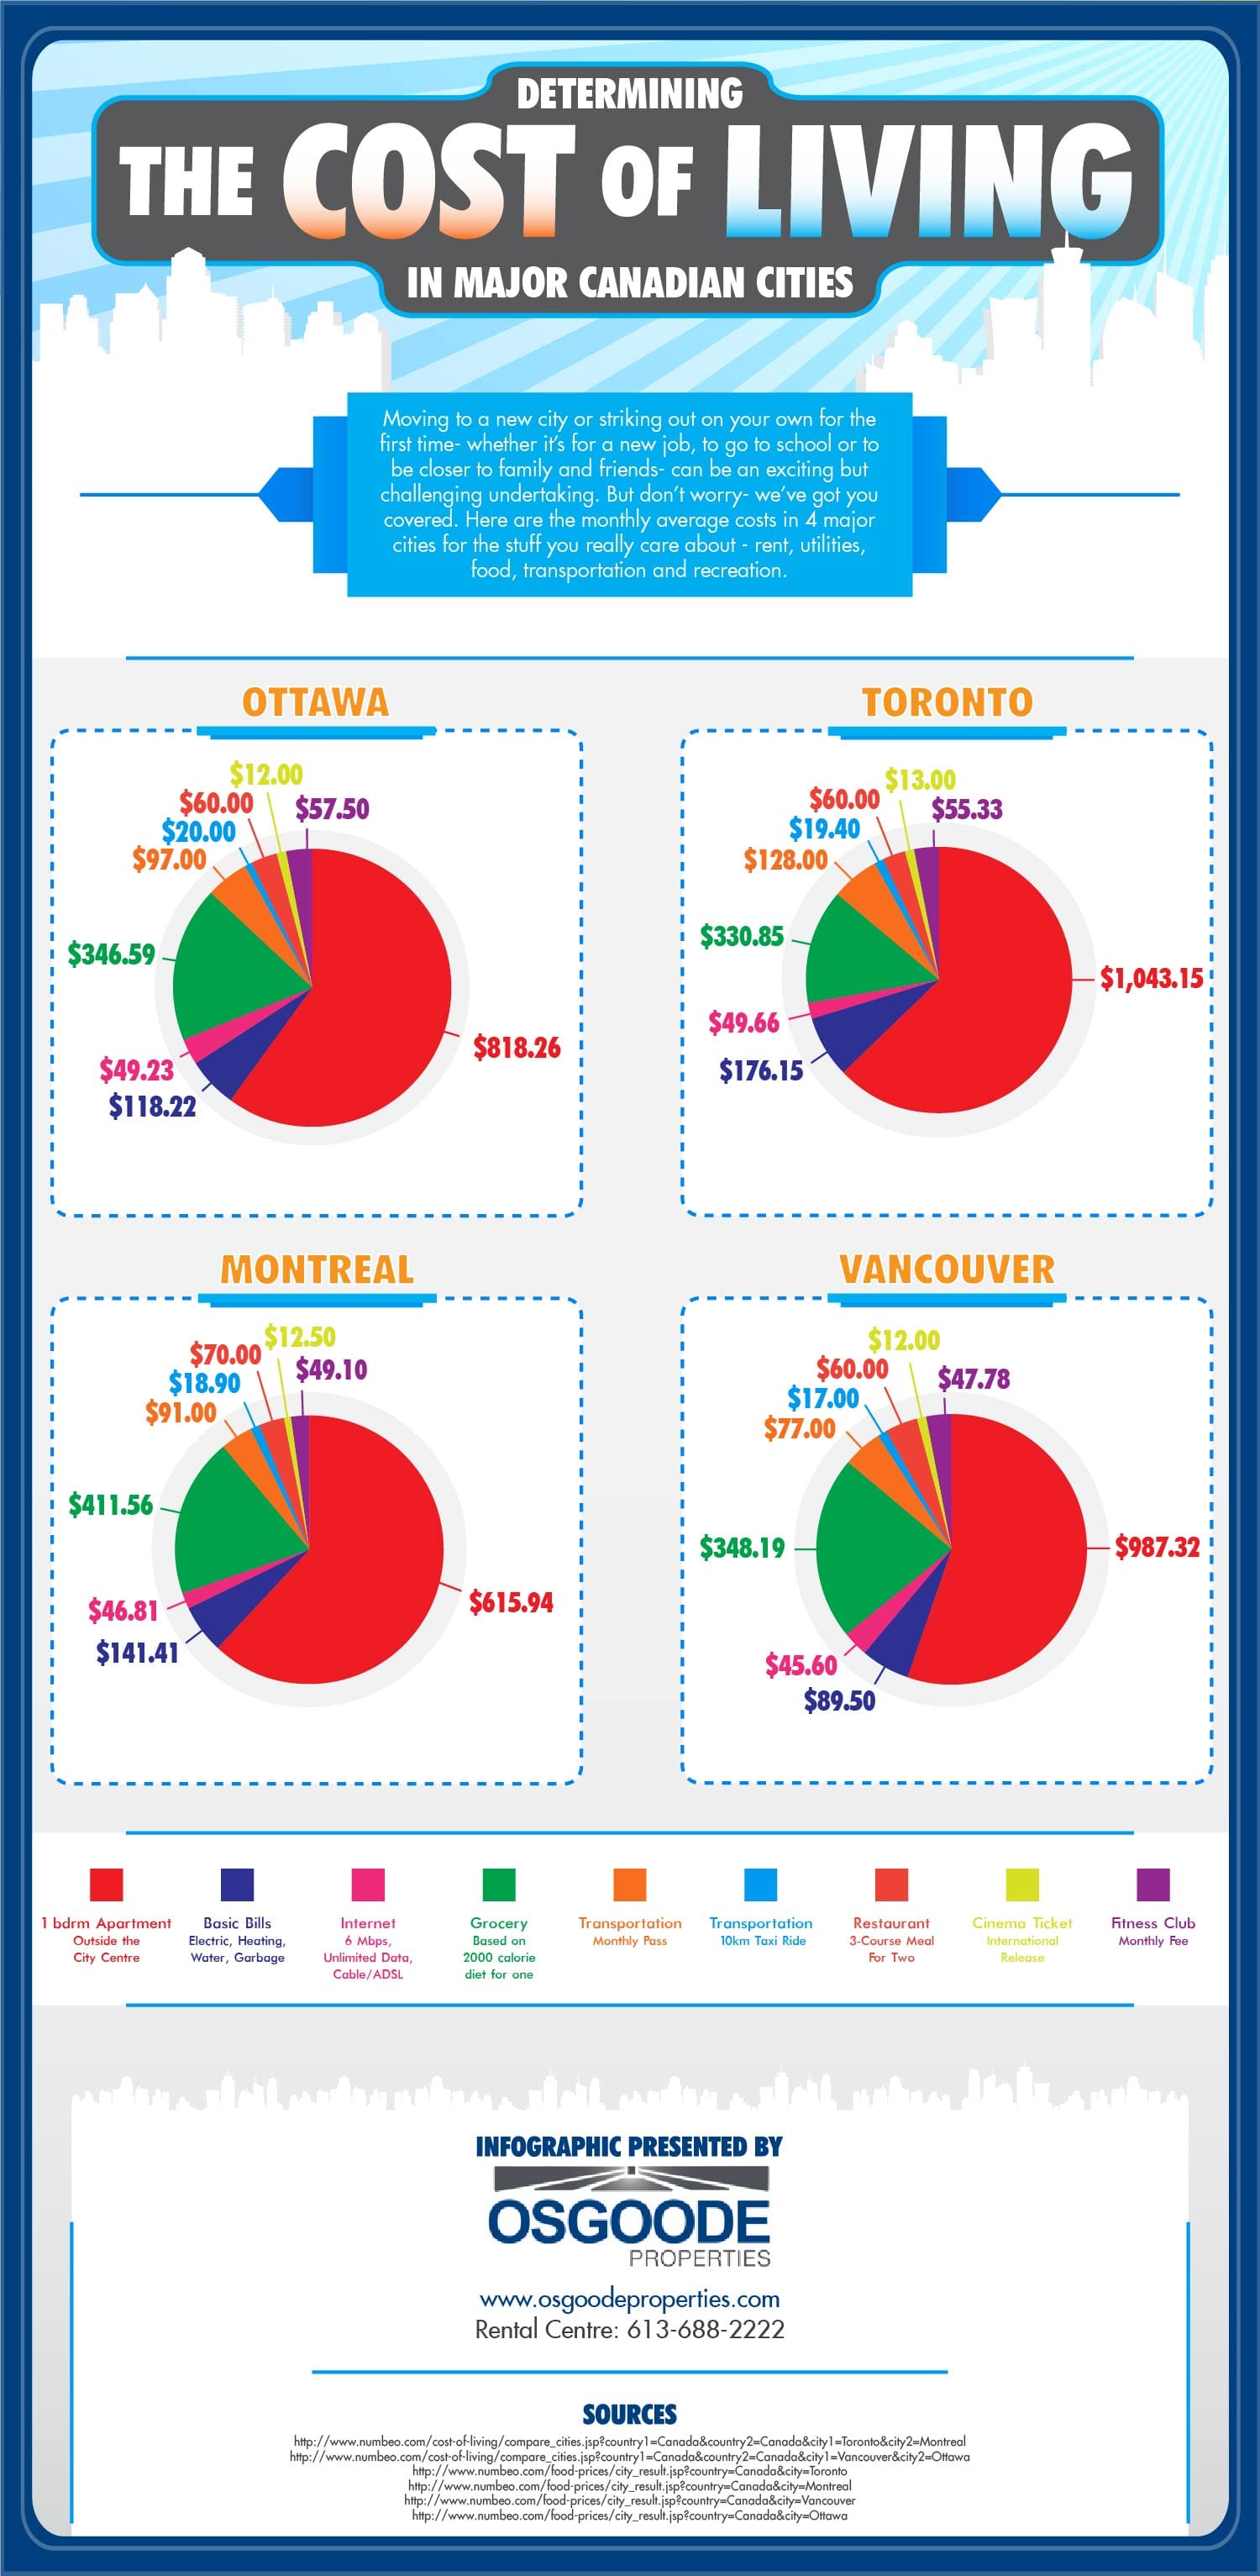 Osgoode Properties INFOGRAPHIC about the Cost of Living in Canadian Cities by RentSeeker.ca